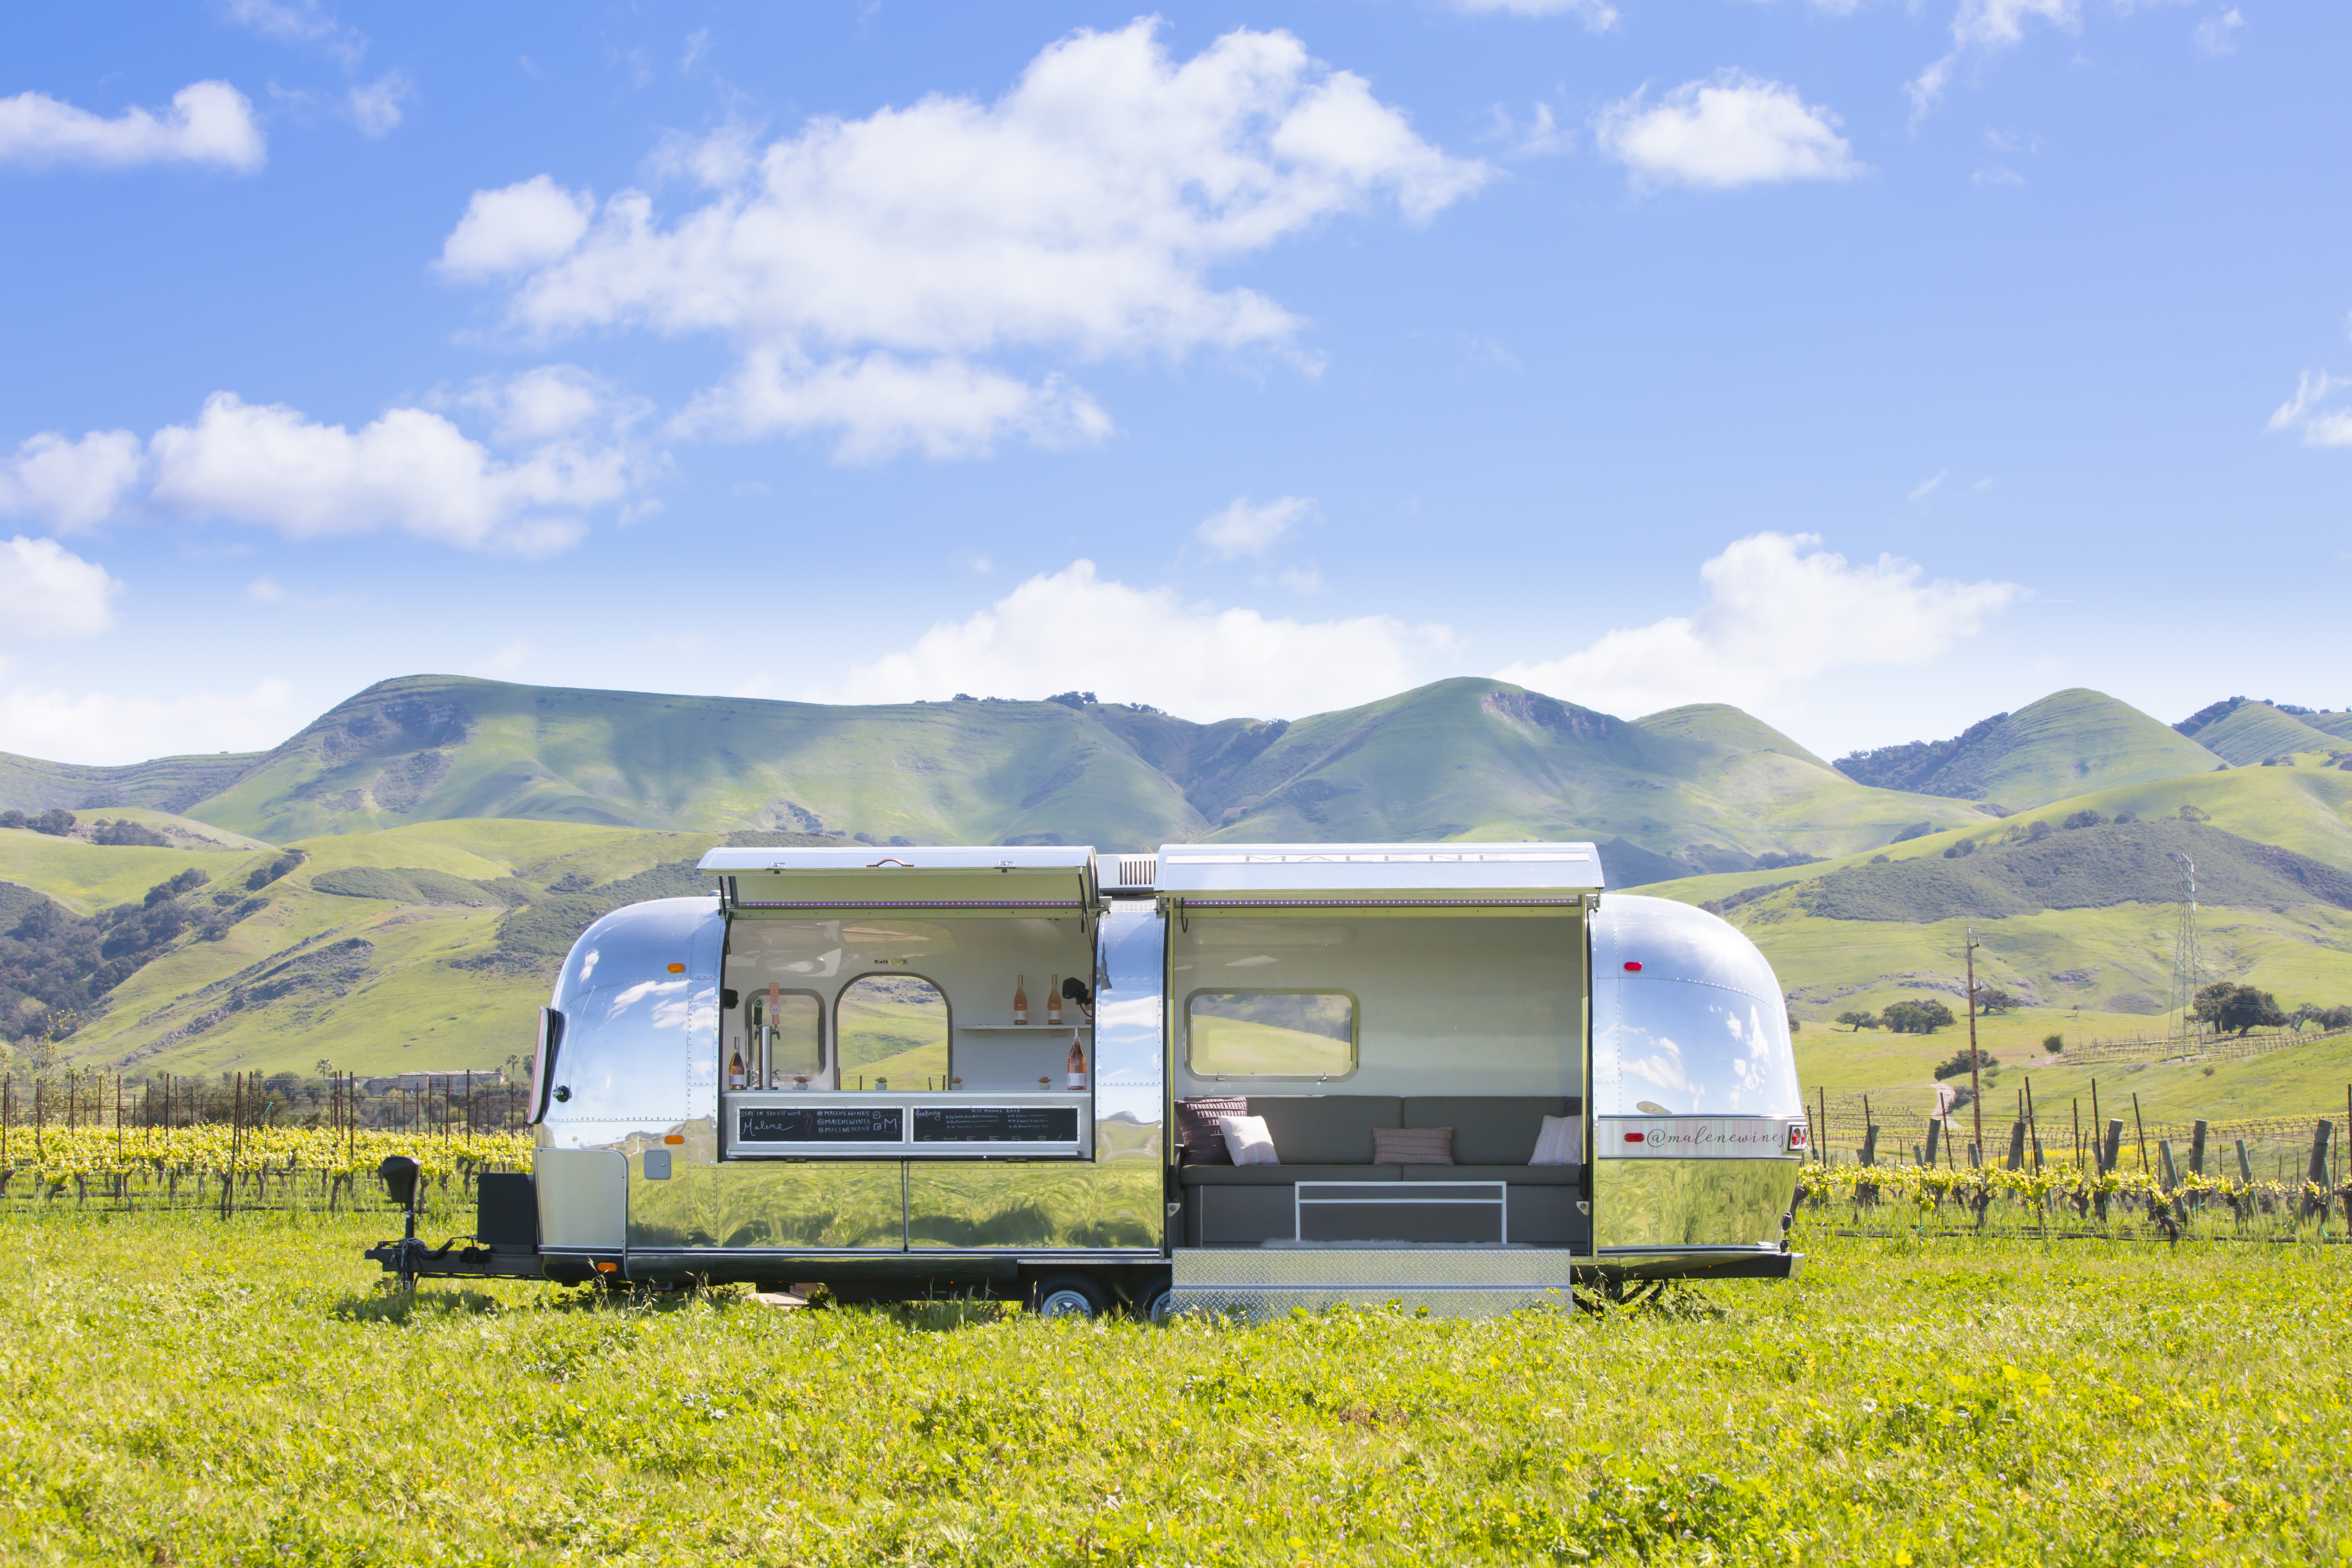 trailer once went out on the road for satellite tastings across California. Although the Airstream is now retired, the concept could happen in Washington with new legislation. (Credit: Crimson Wine Group)